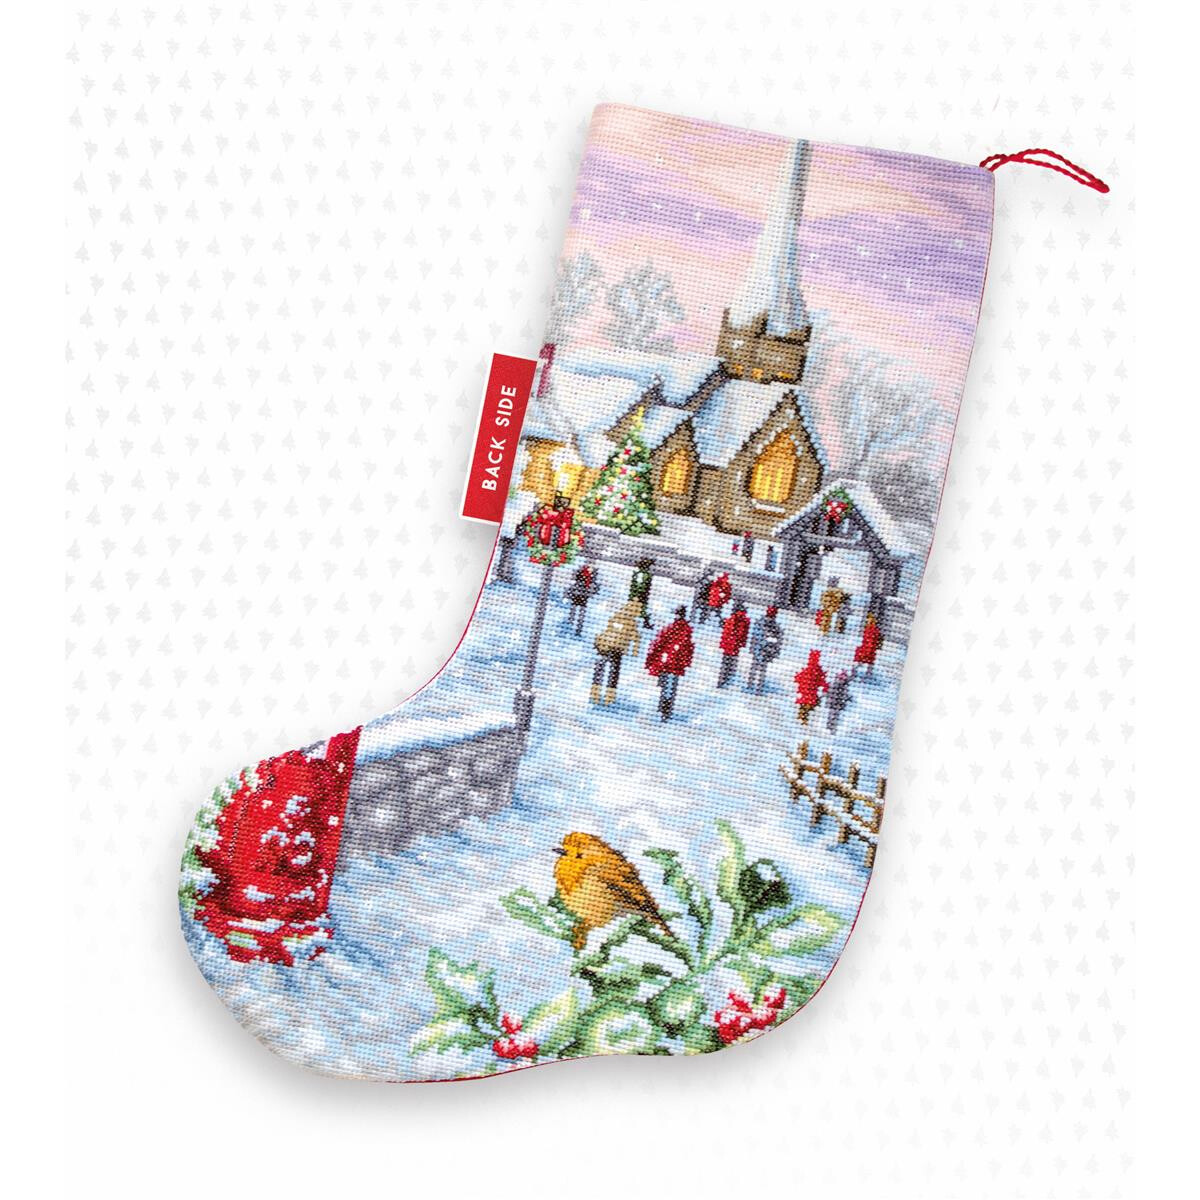 A Christmas stocking decorated with a snowy village scene...